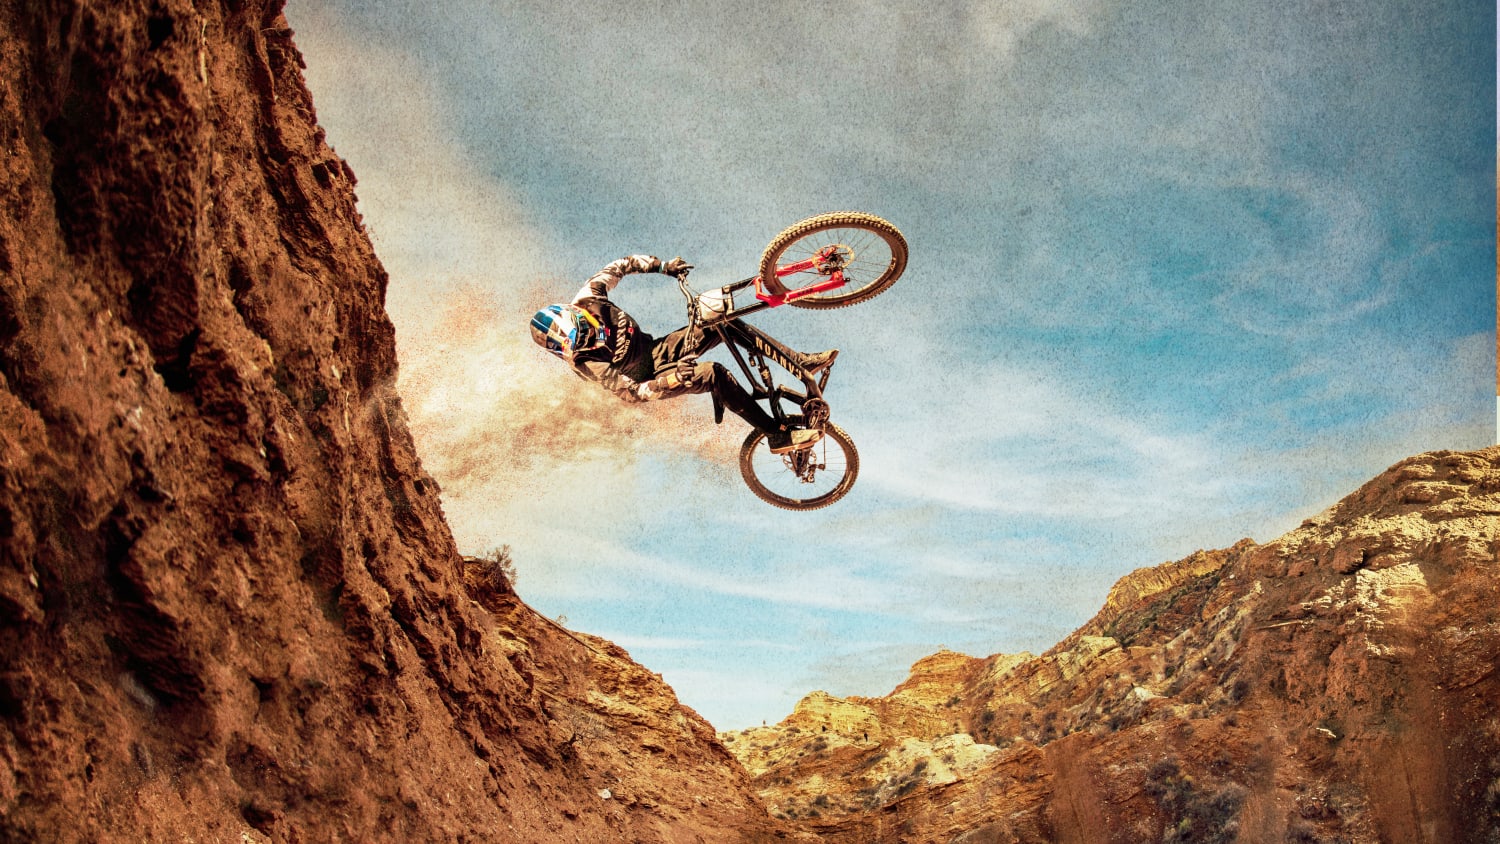 Red Bull Rampage: event info and videos